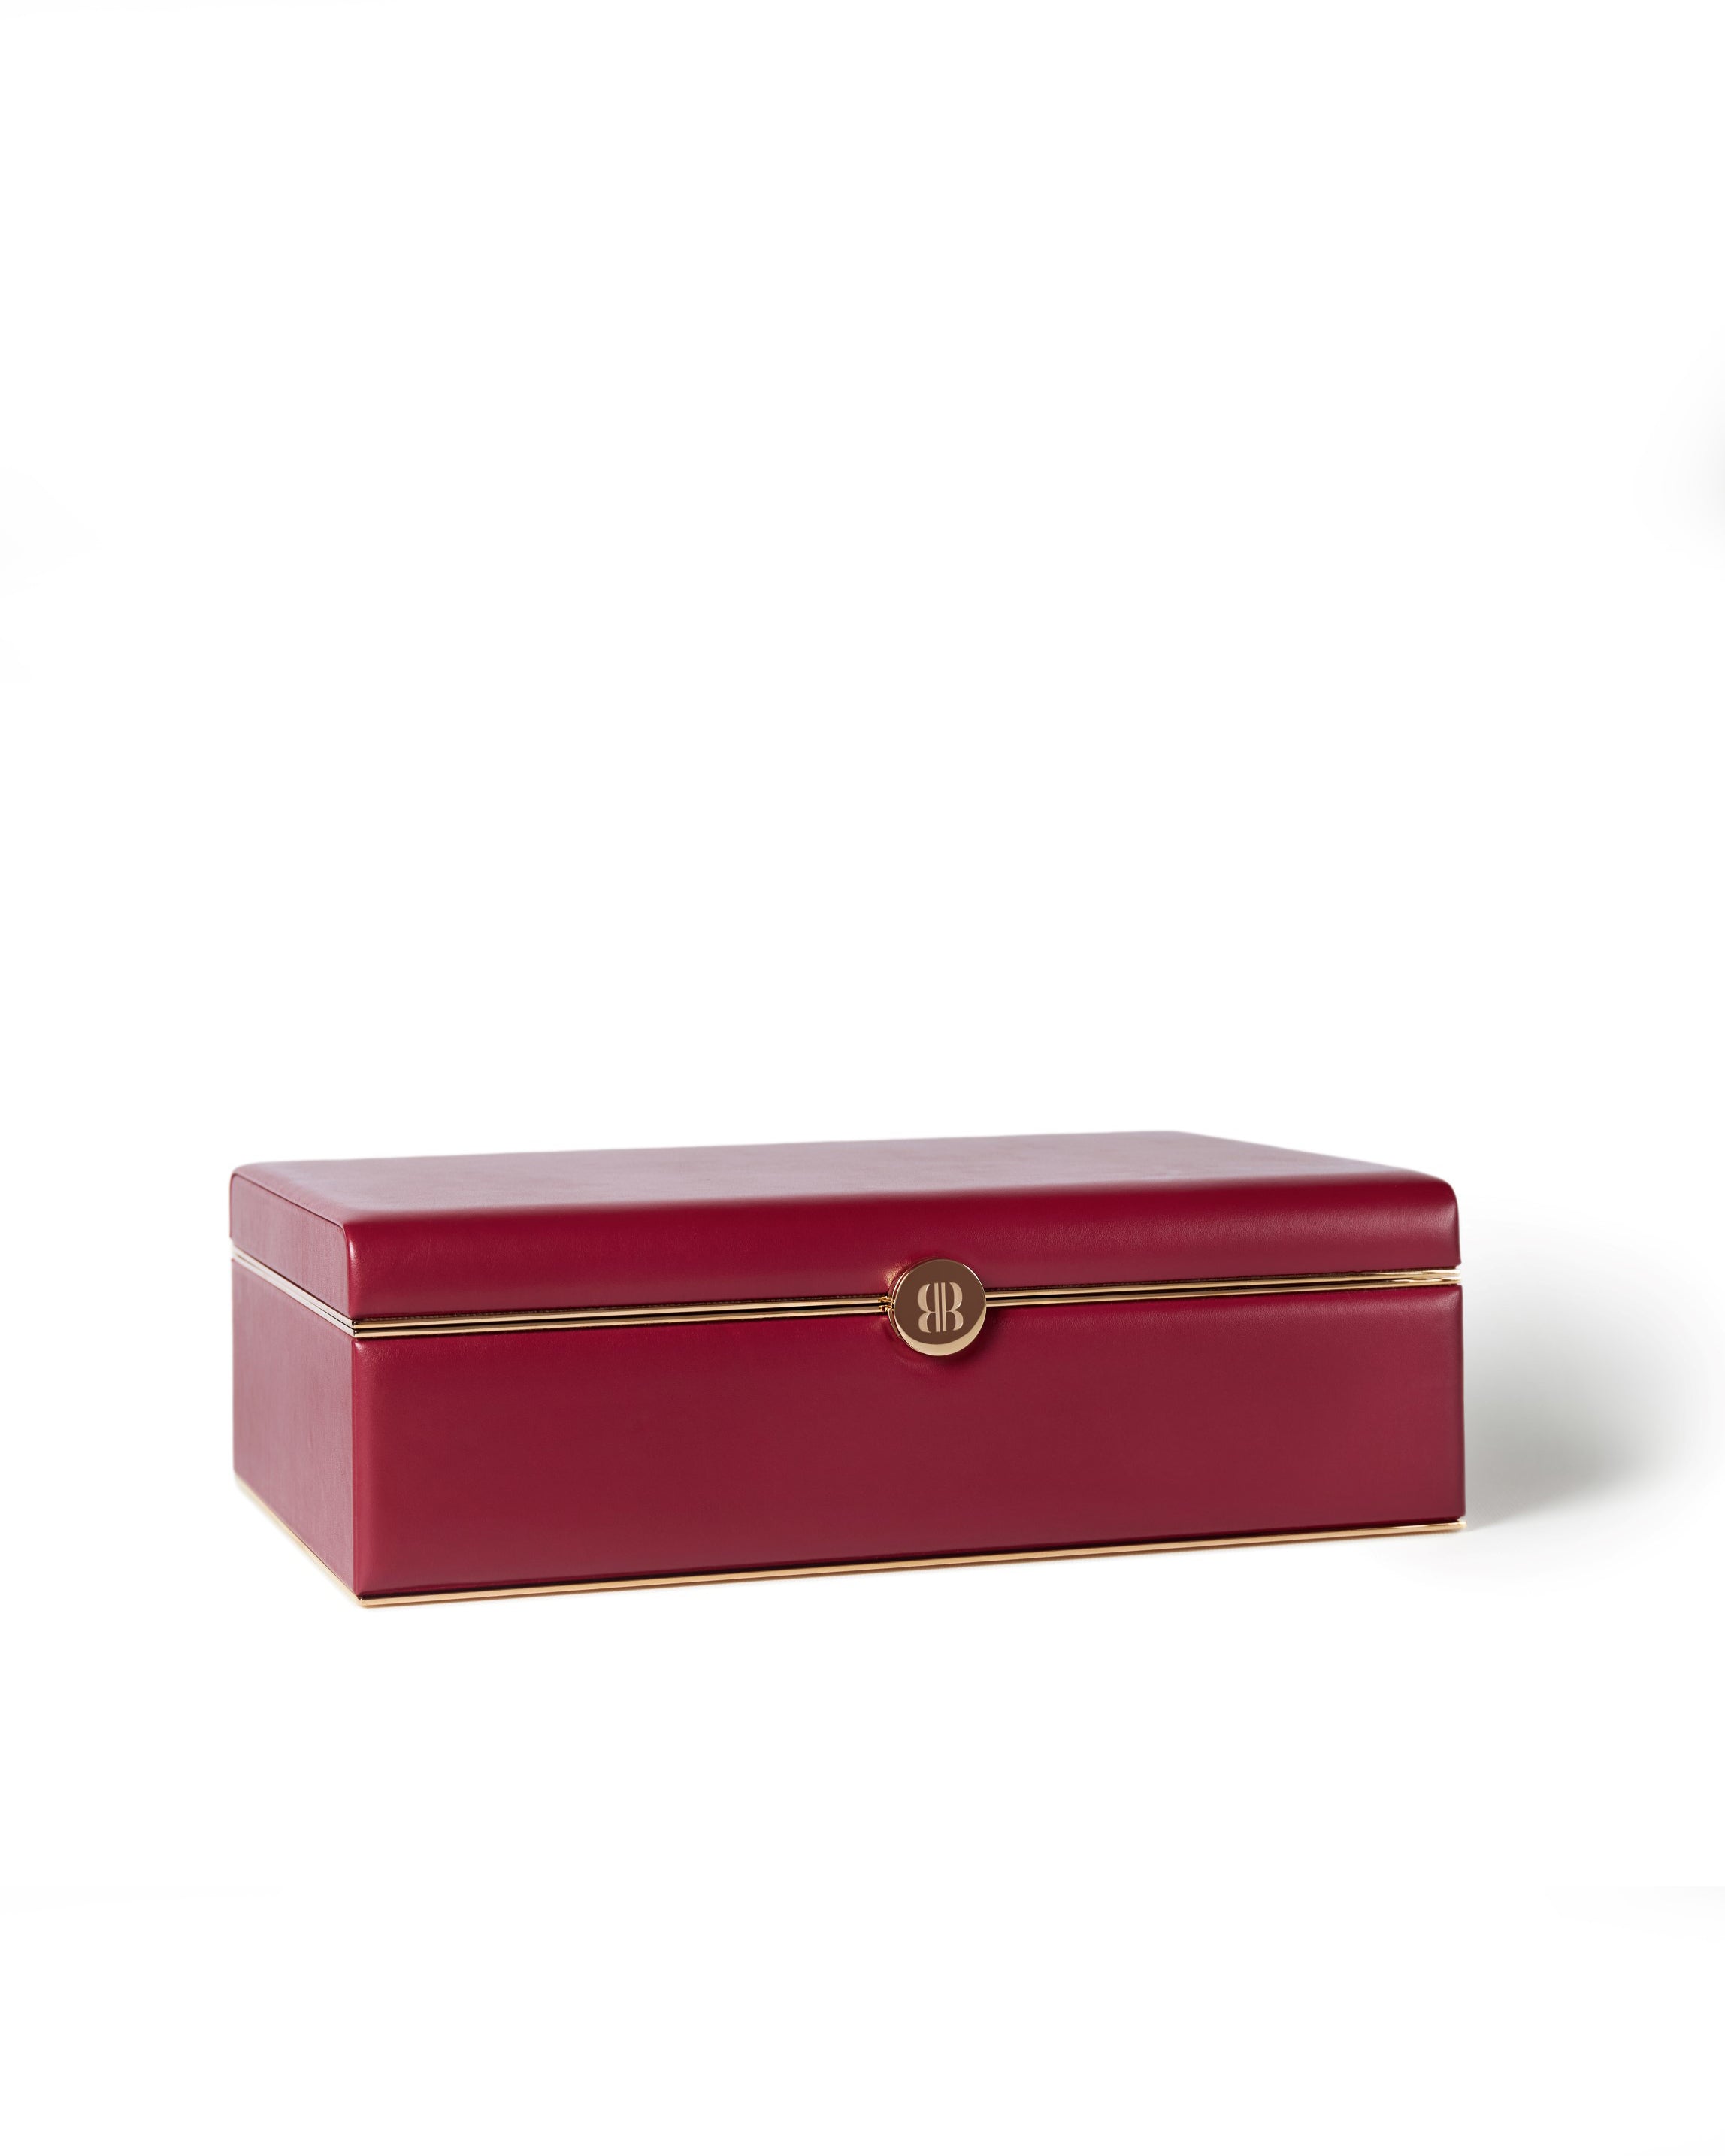 Bernardini Milano jewellery holder in red leather, yellow gold plated and silk close